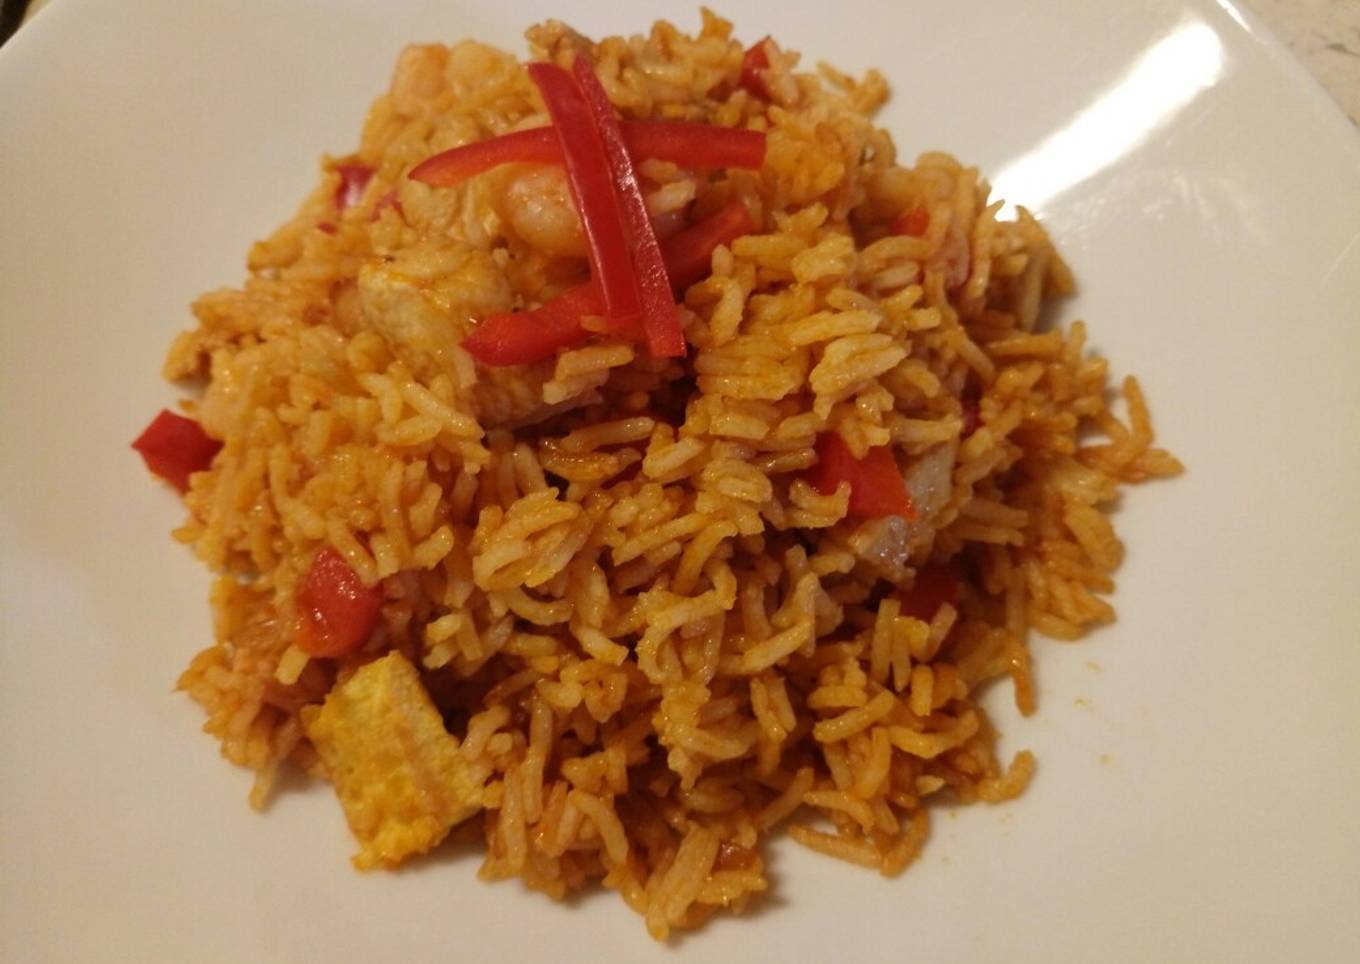 Fluffy’s spicy special fried rice